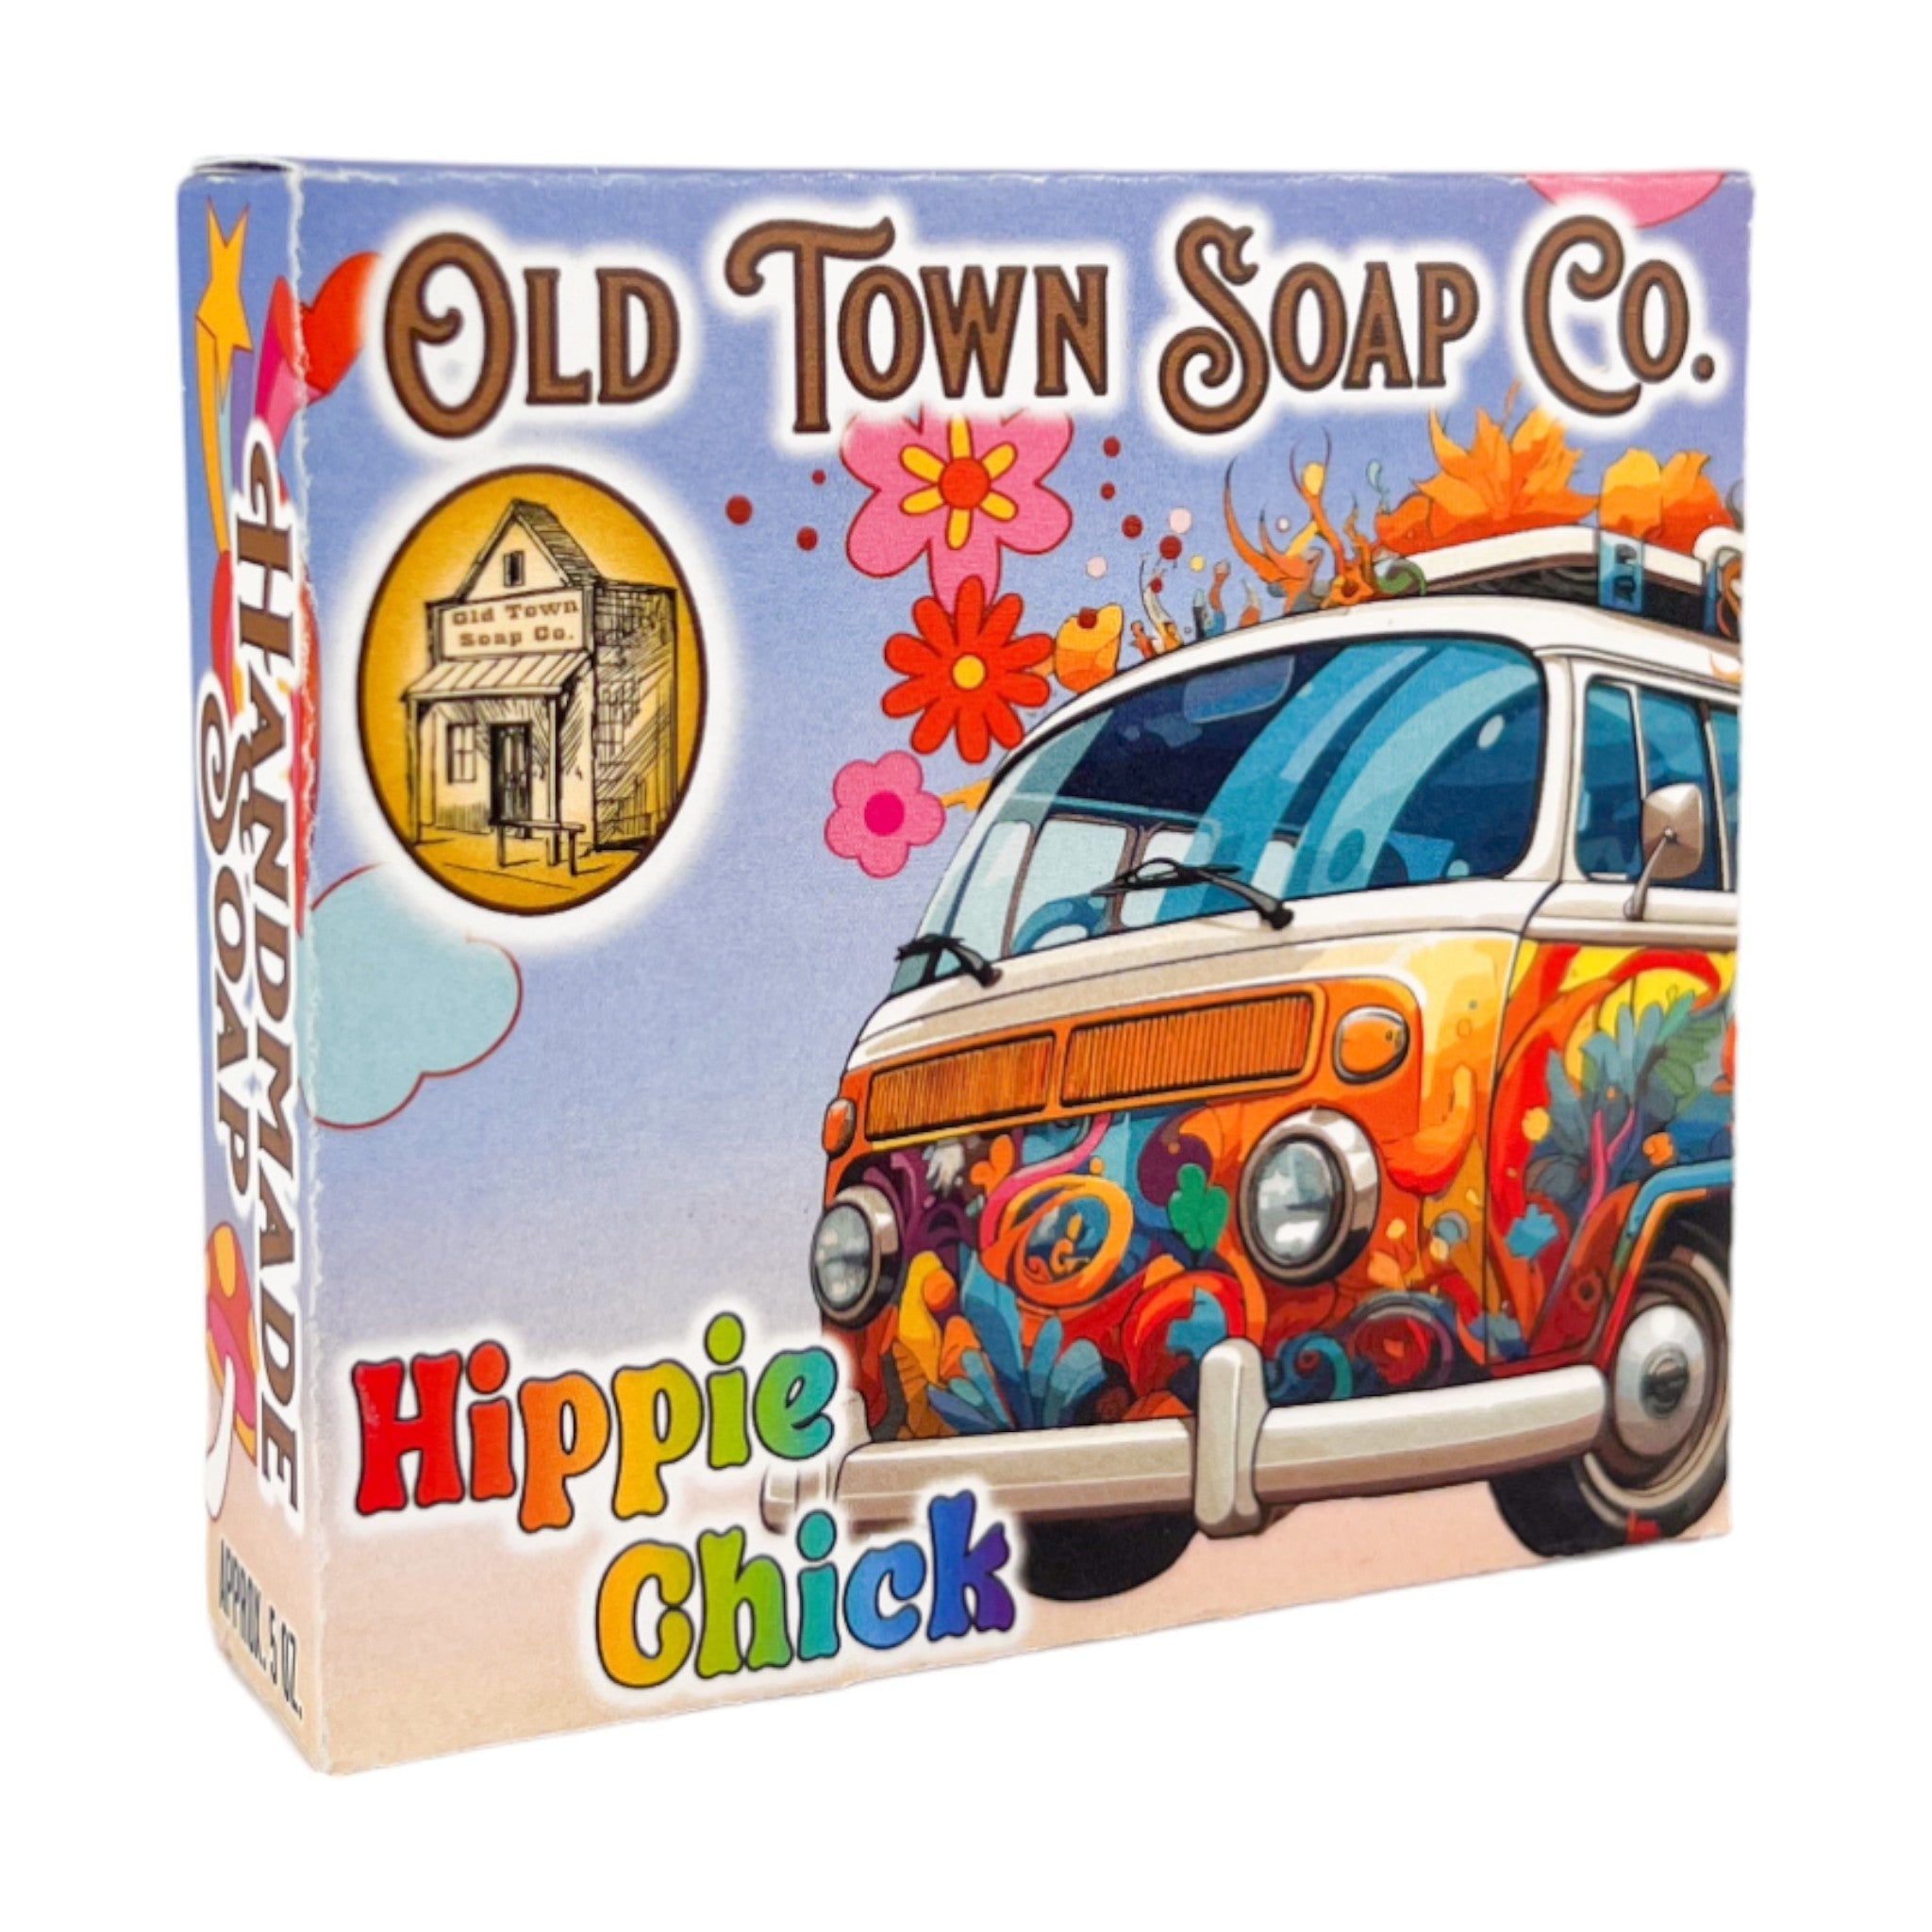 Hippie Chick -Bar Soap - Old Town Soap Co.